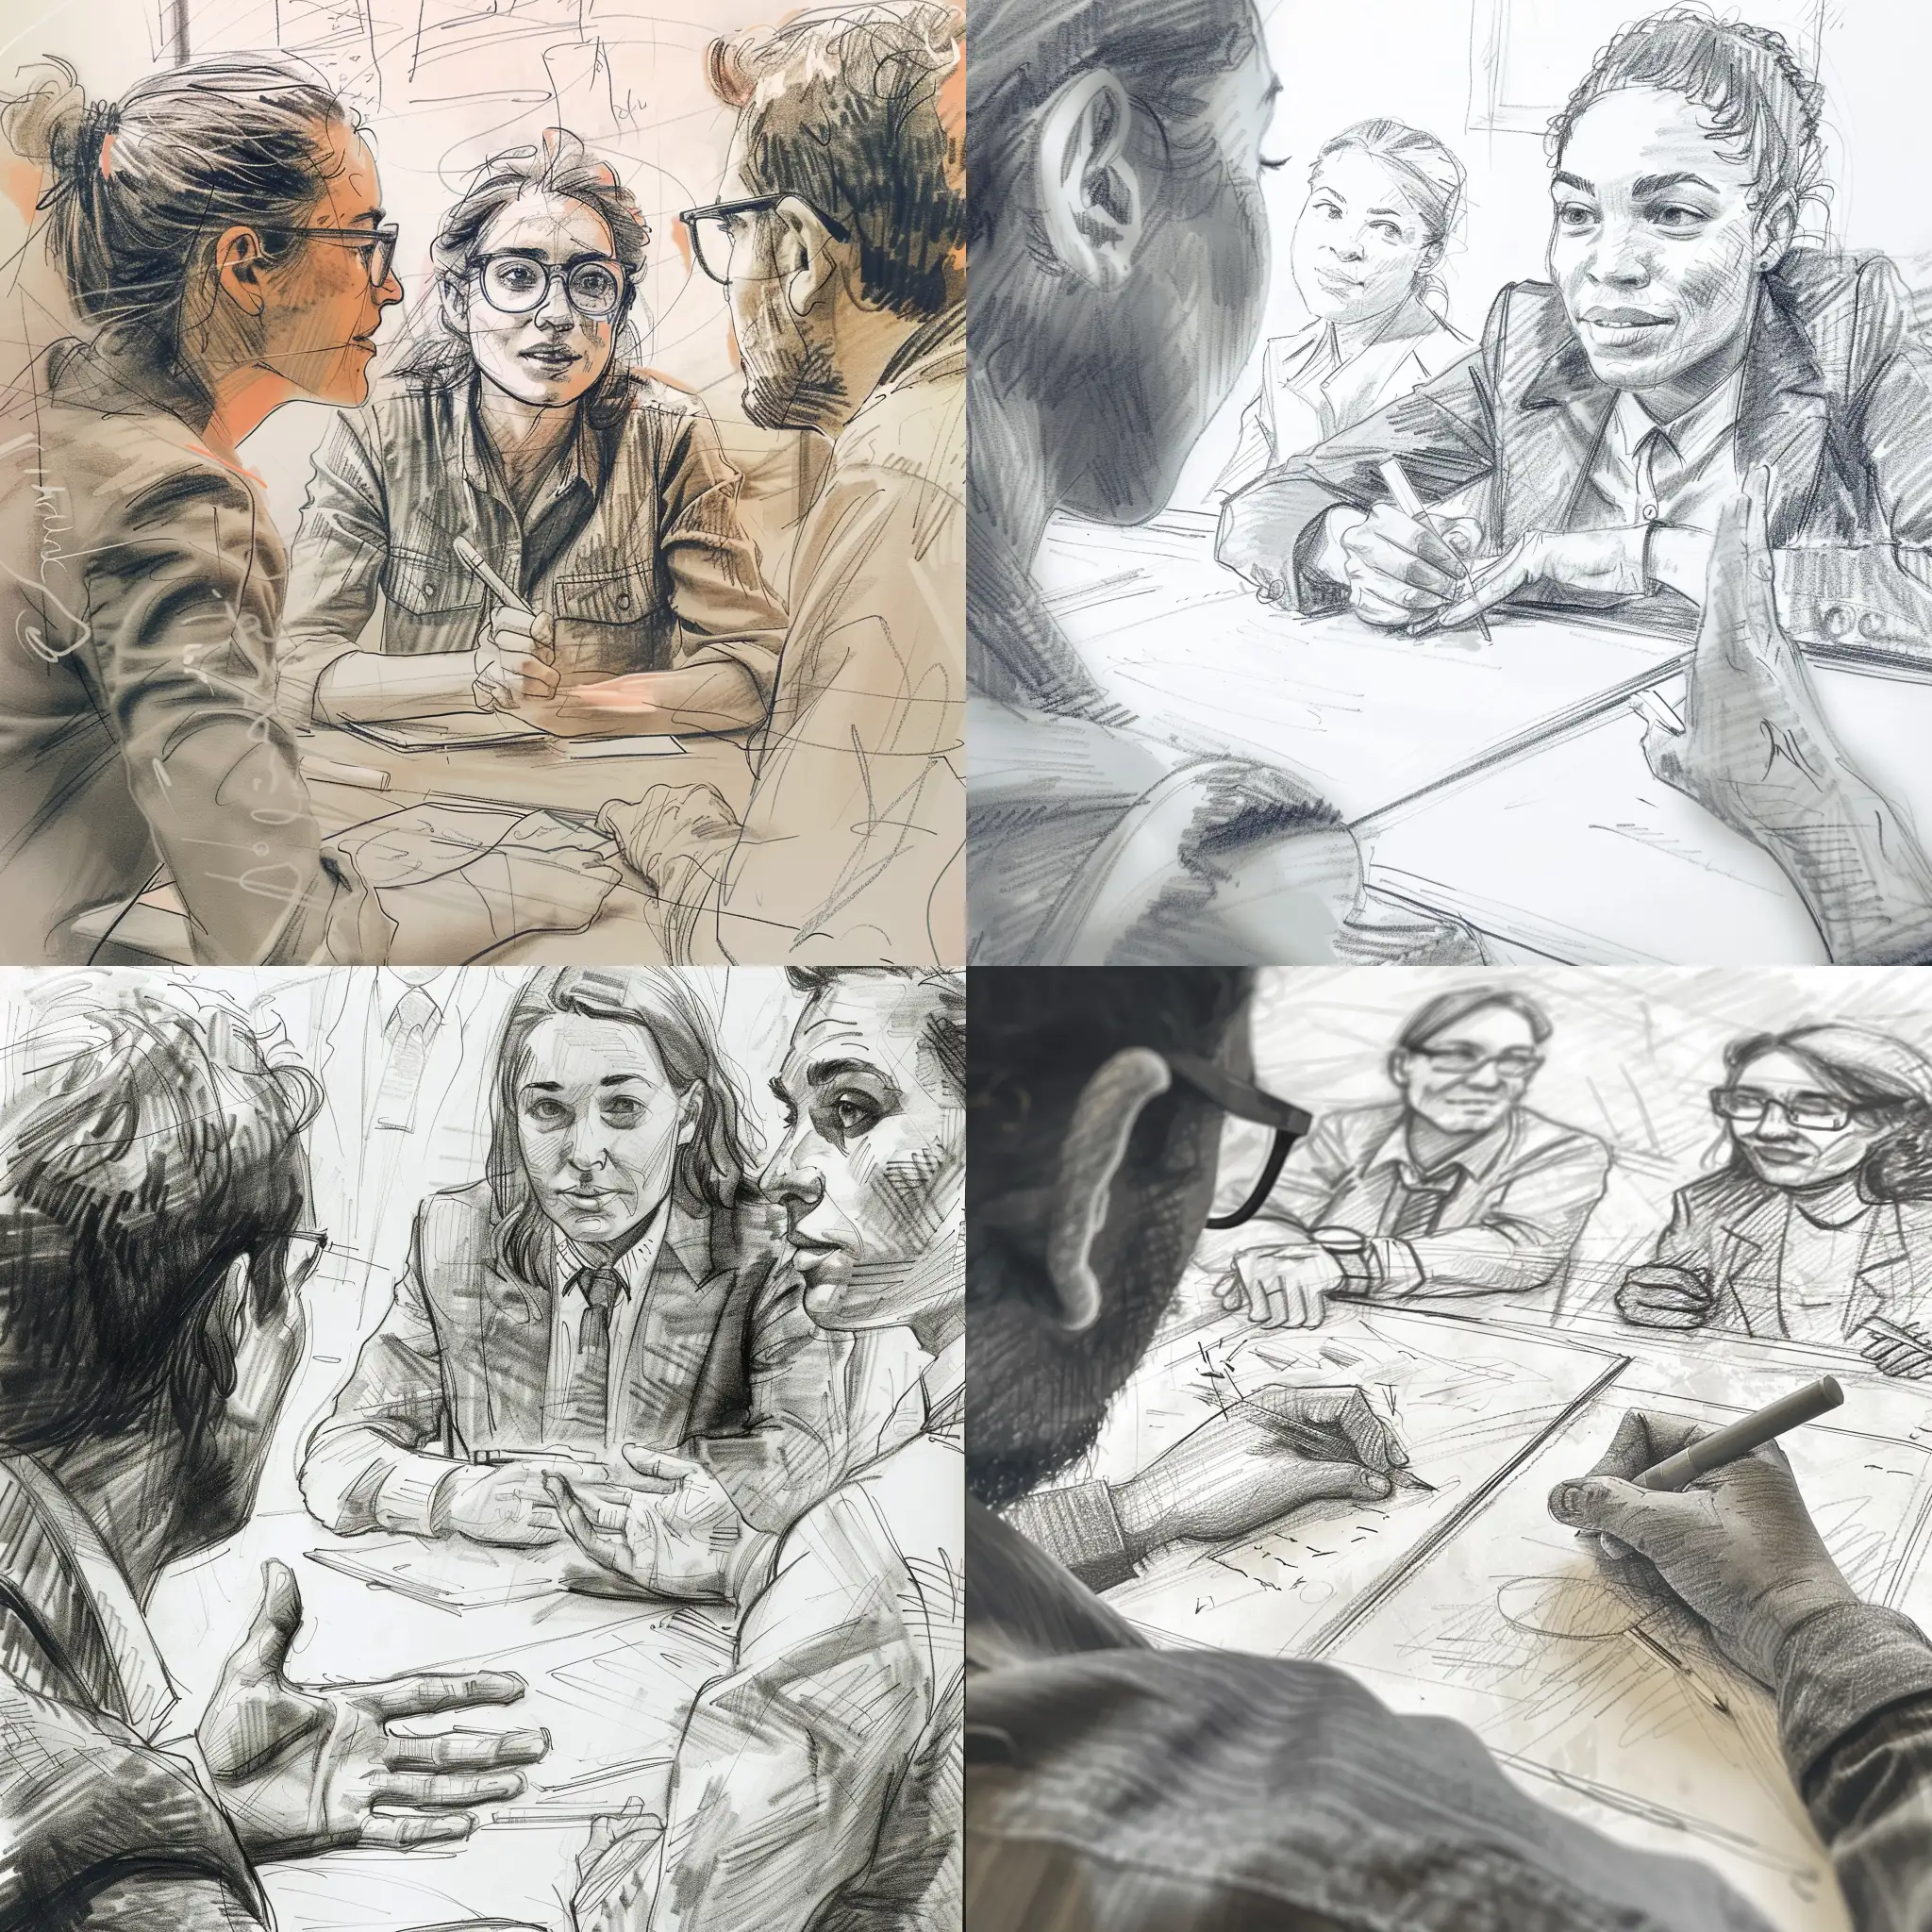 A detailed sketch with graphite pencil and subtle, minimal color accents depicting close-up shots of participants discussing new business ideas in a meeting. The frames focus on expressive faces, hands gesturing, and notes being taken. The setting is a modern office with natural light from windows, creating a professional and engaged atmosphere." --s 0 --v 6.0 --style raw